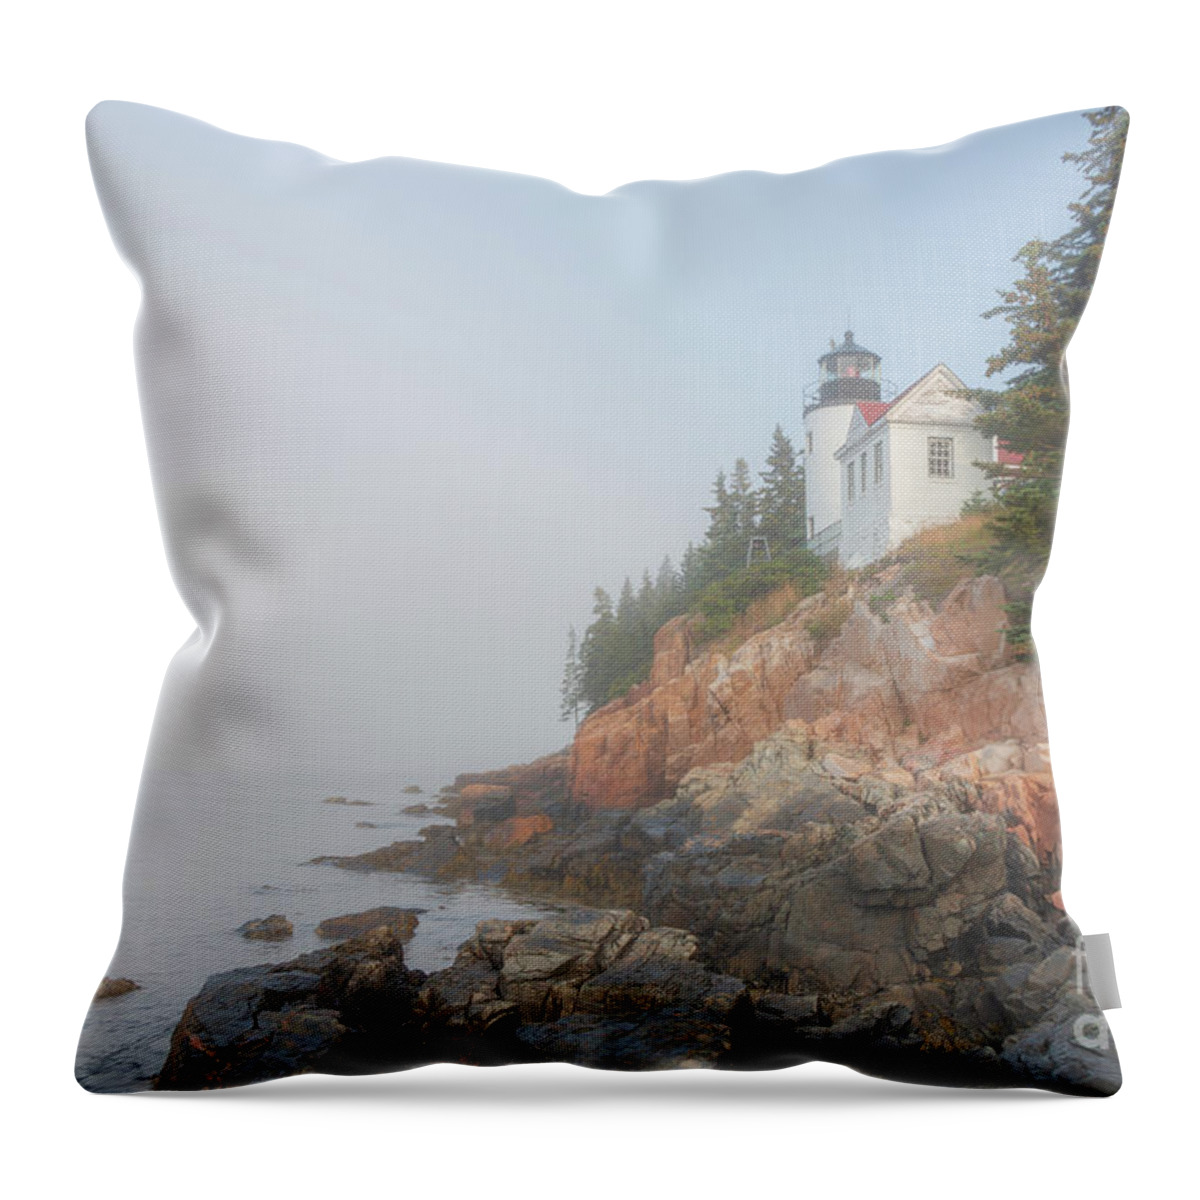 #elizabethdow Throw Pillow featuring the photograph Bass Harbor Sunrise A by Elizabeth Dow